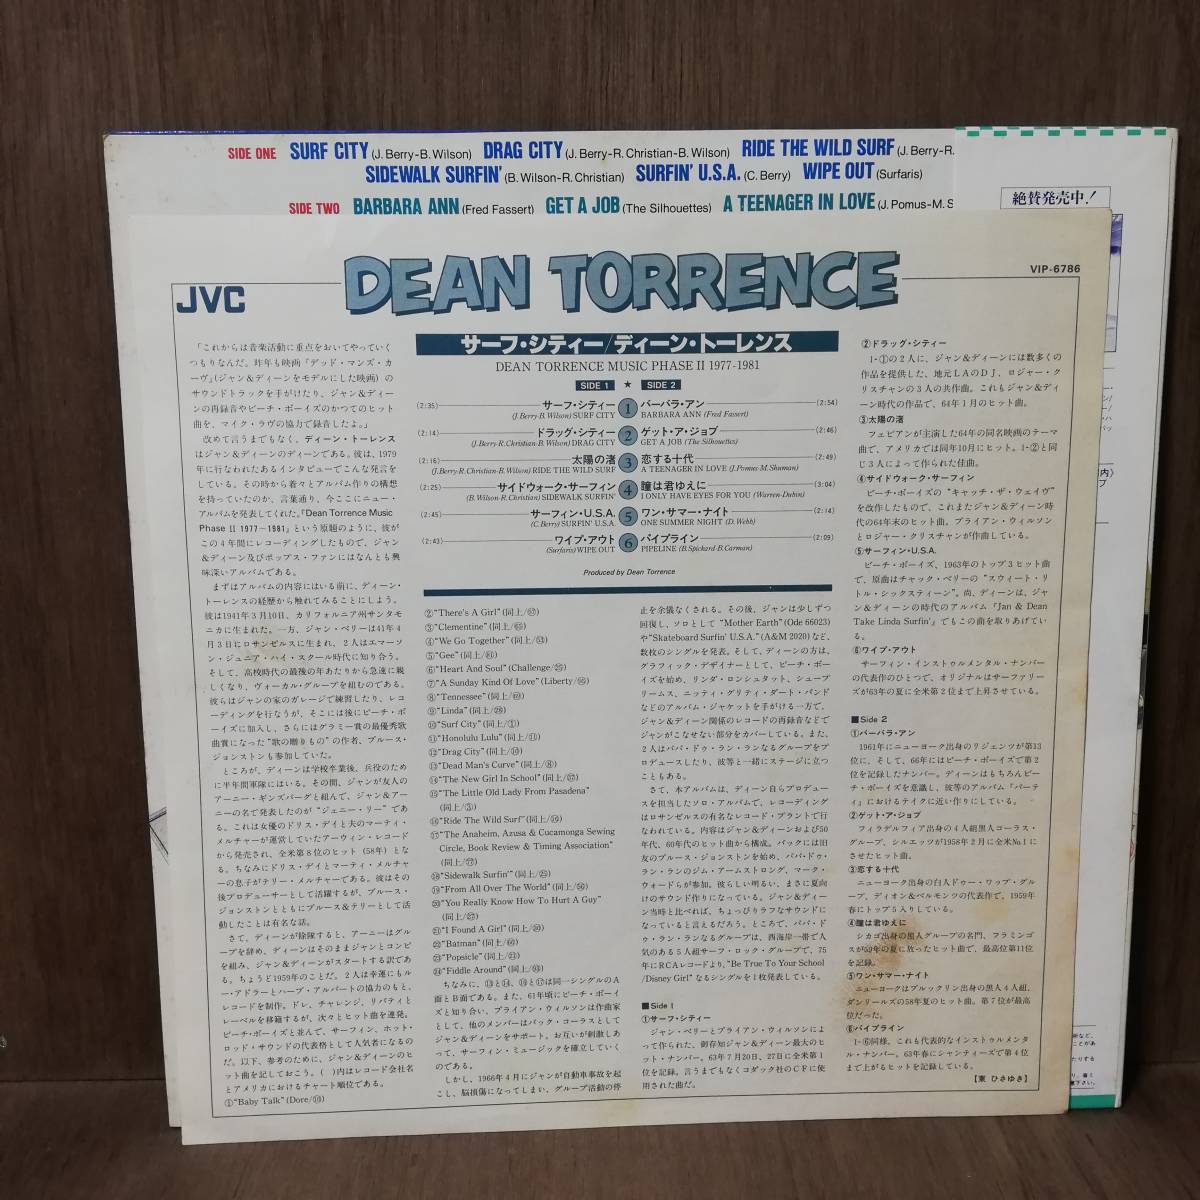 LP - Dean Torrence - Music Phase II 1977-1981 - VIP-6786 - *17_画像3